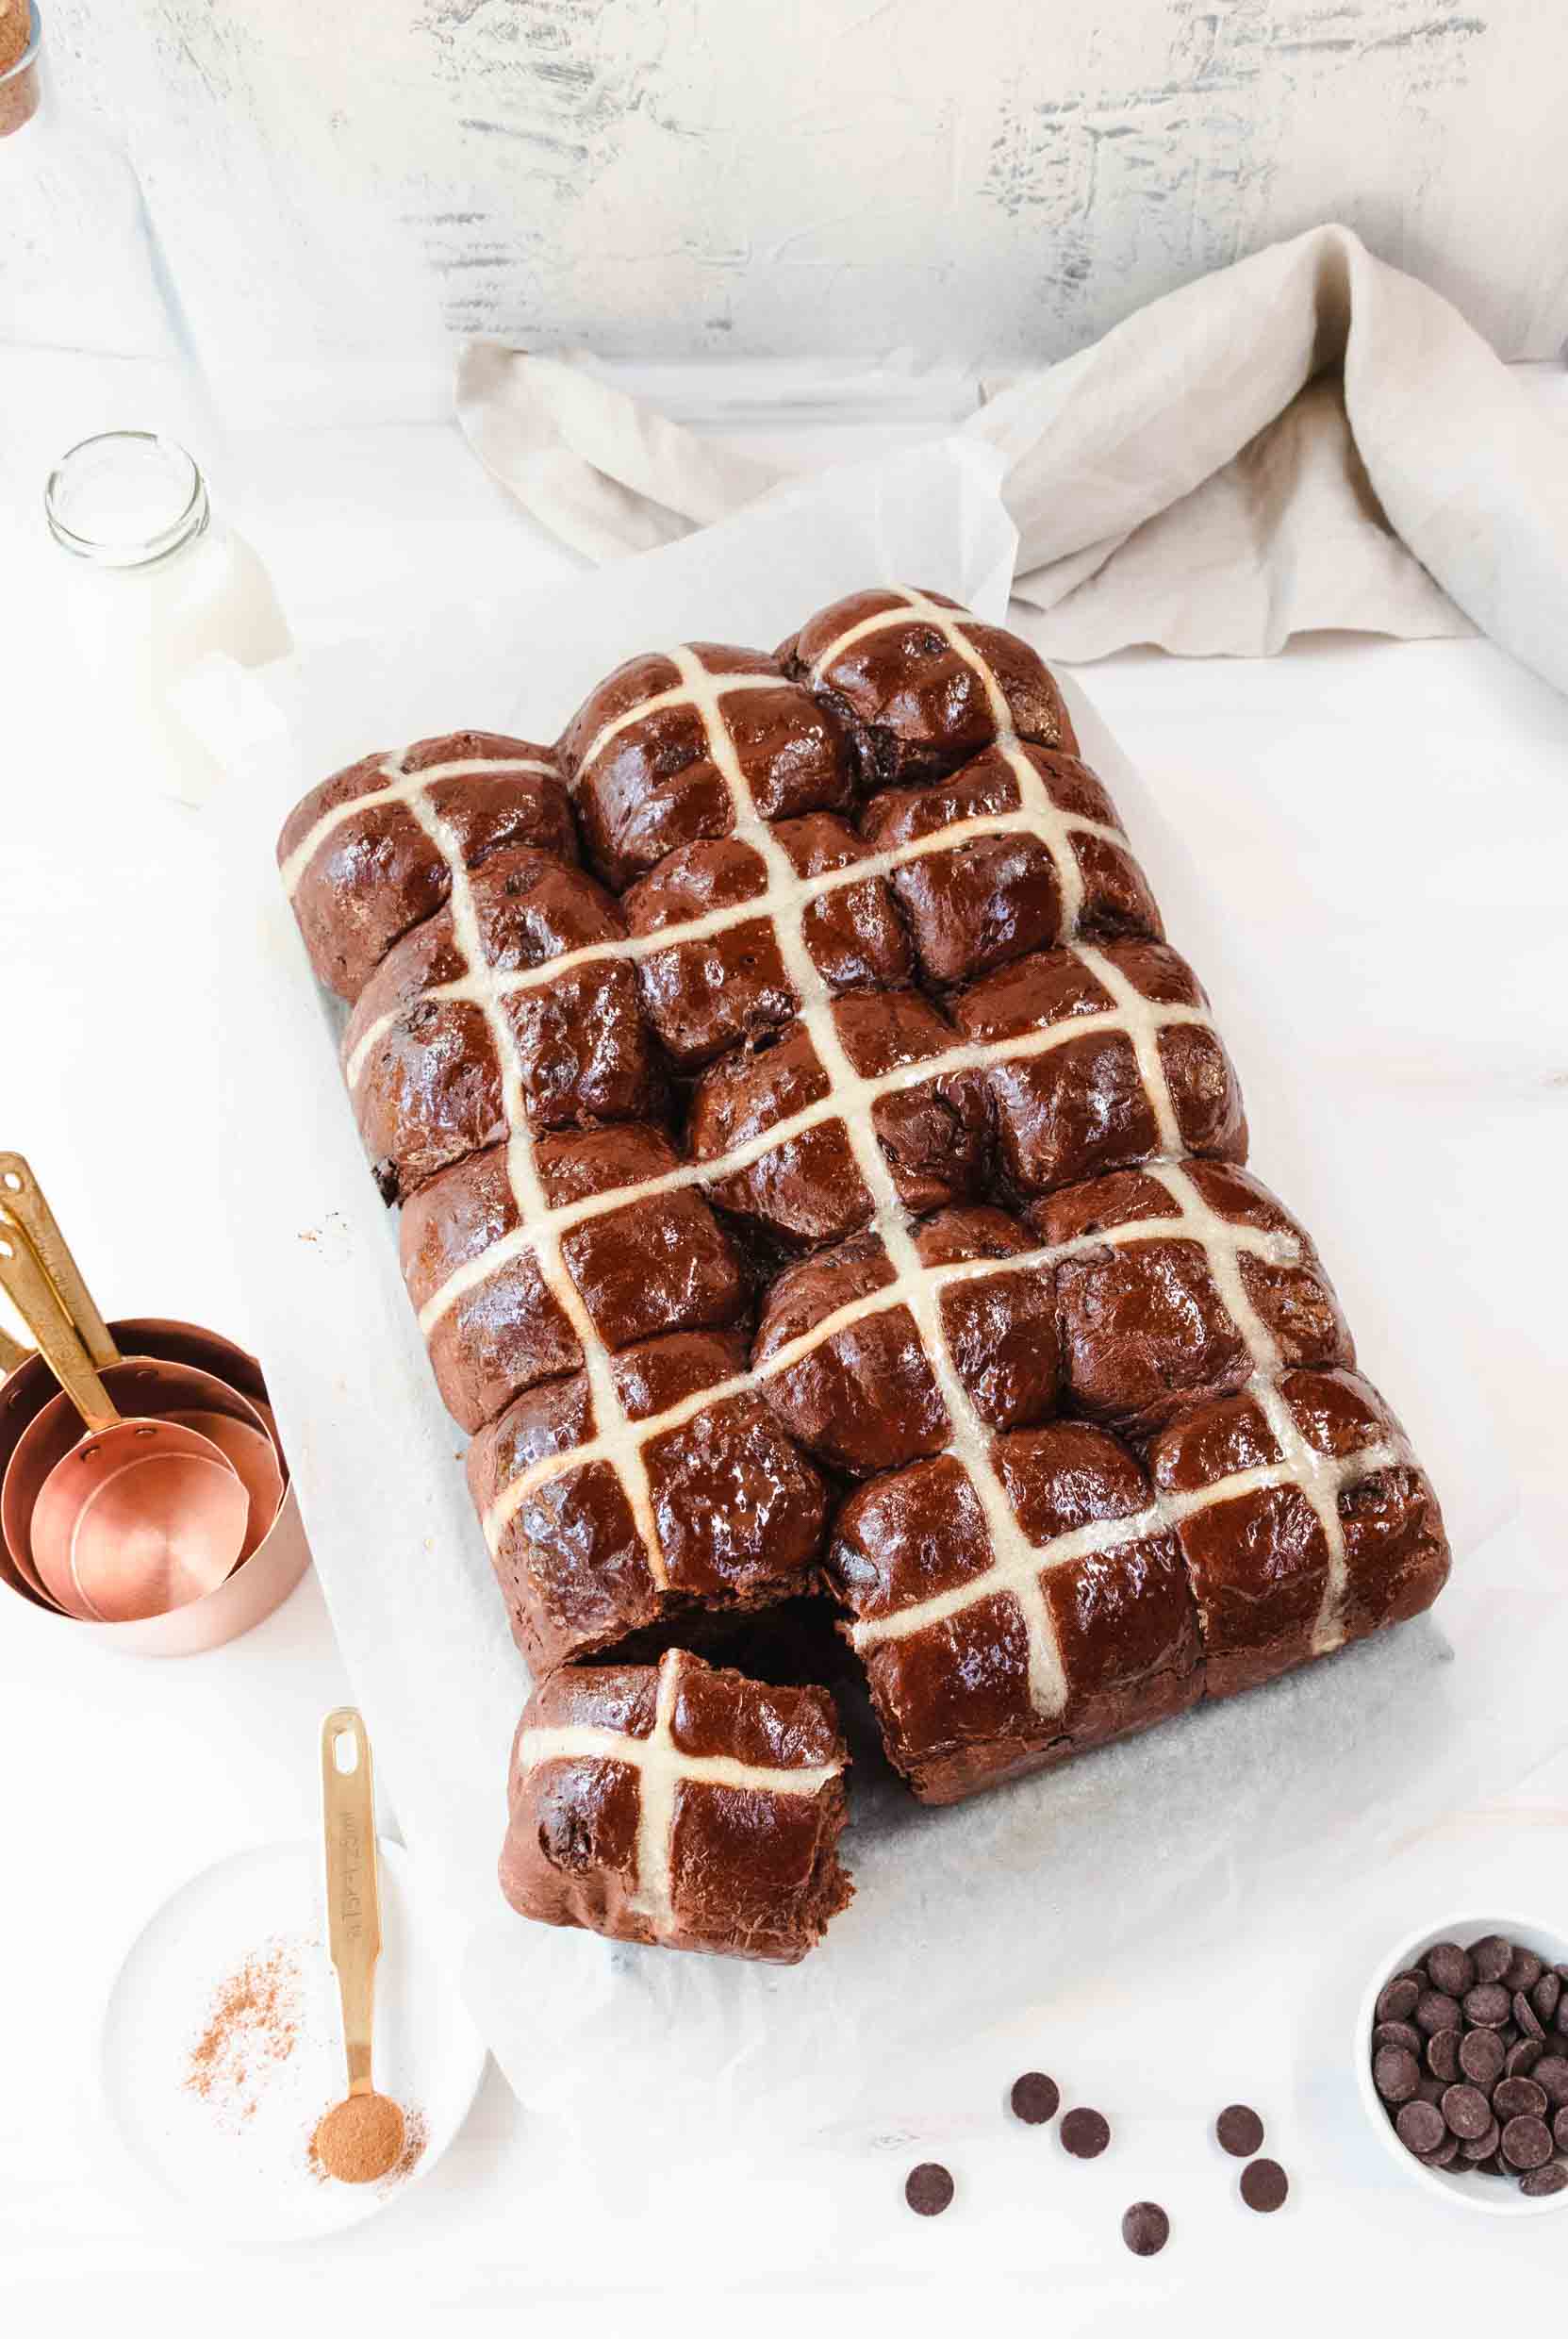 freshly baked chocolate chip hot cross buns